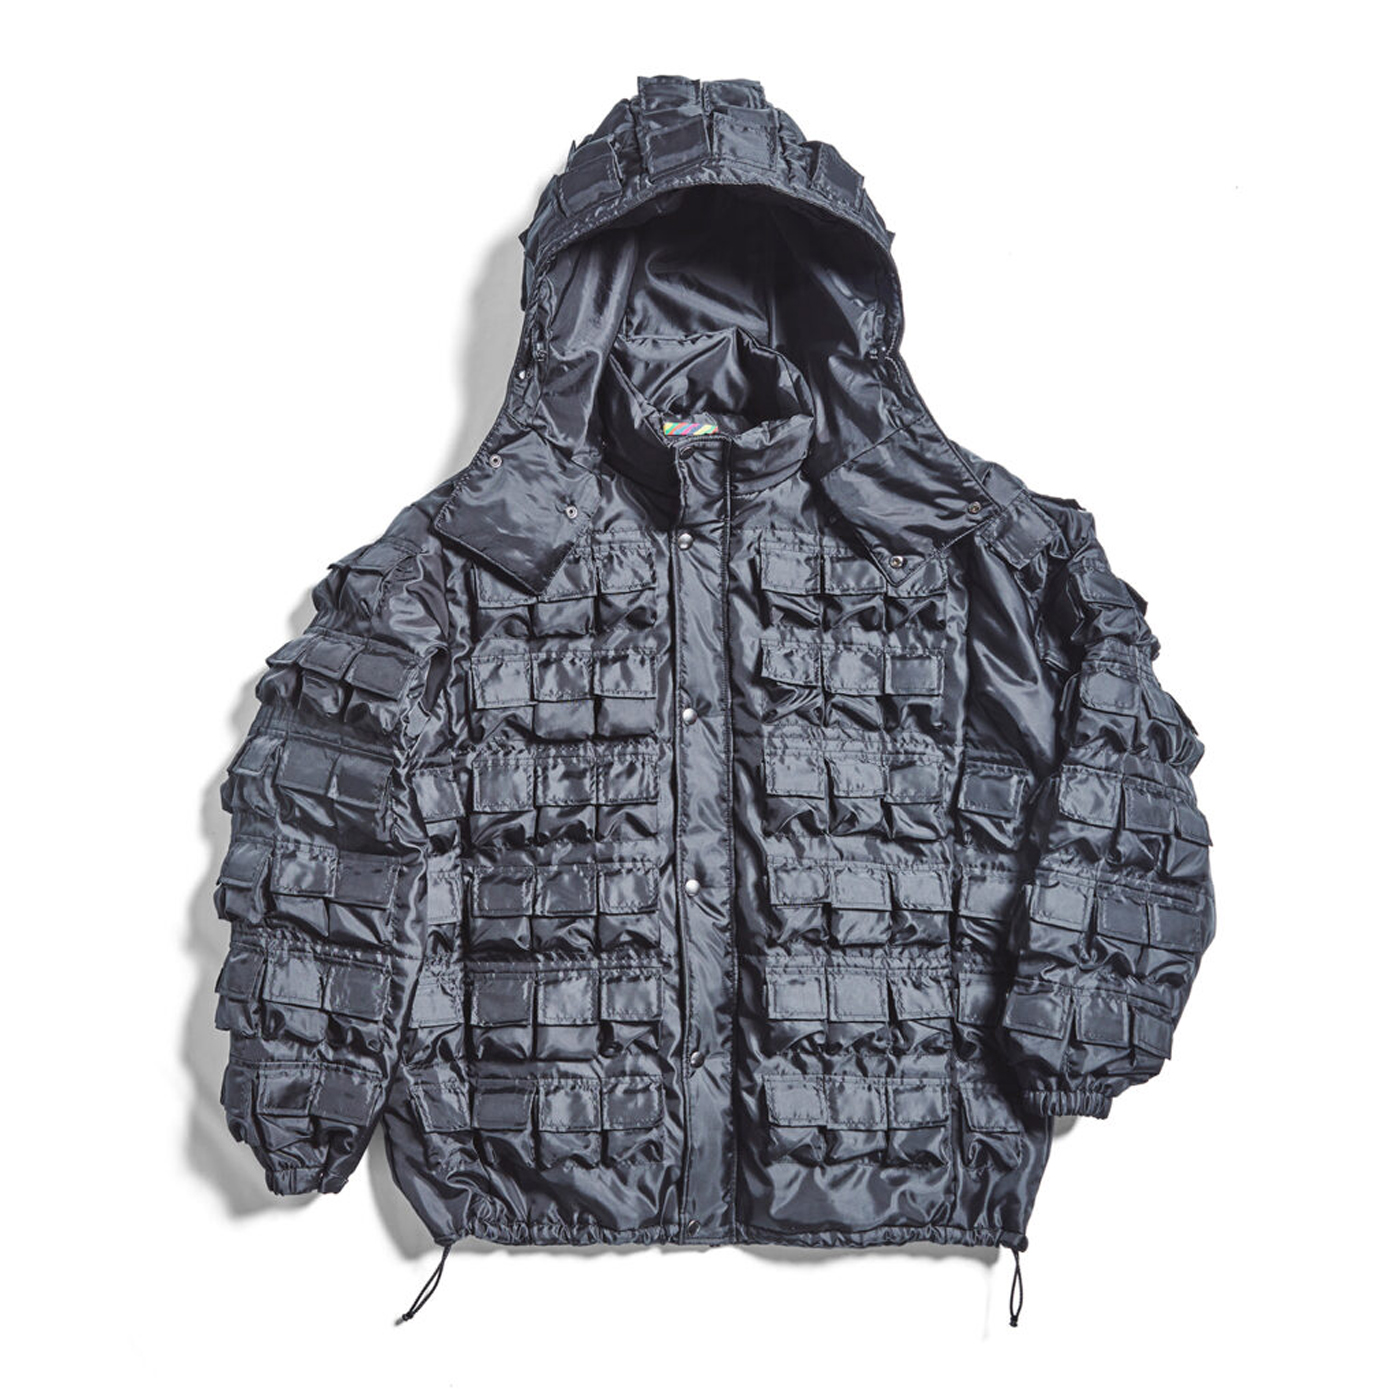 general-research-is-ness-parasite-pocket-jacket (32)